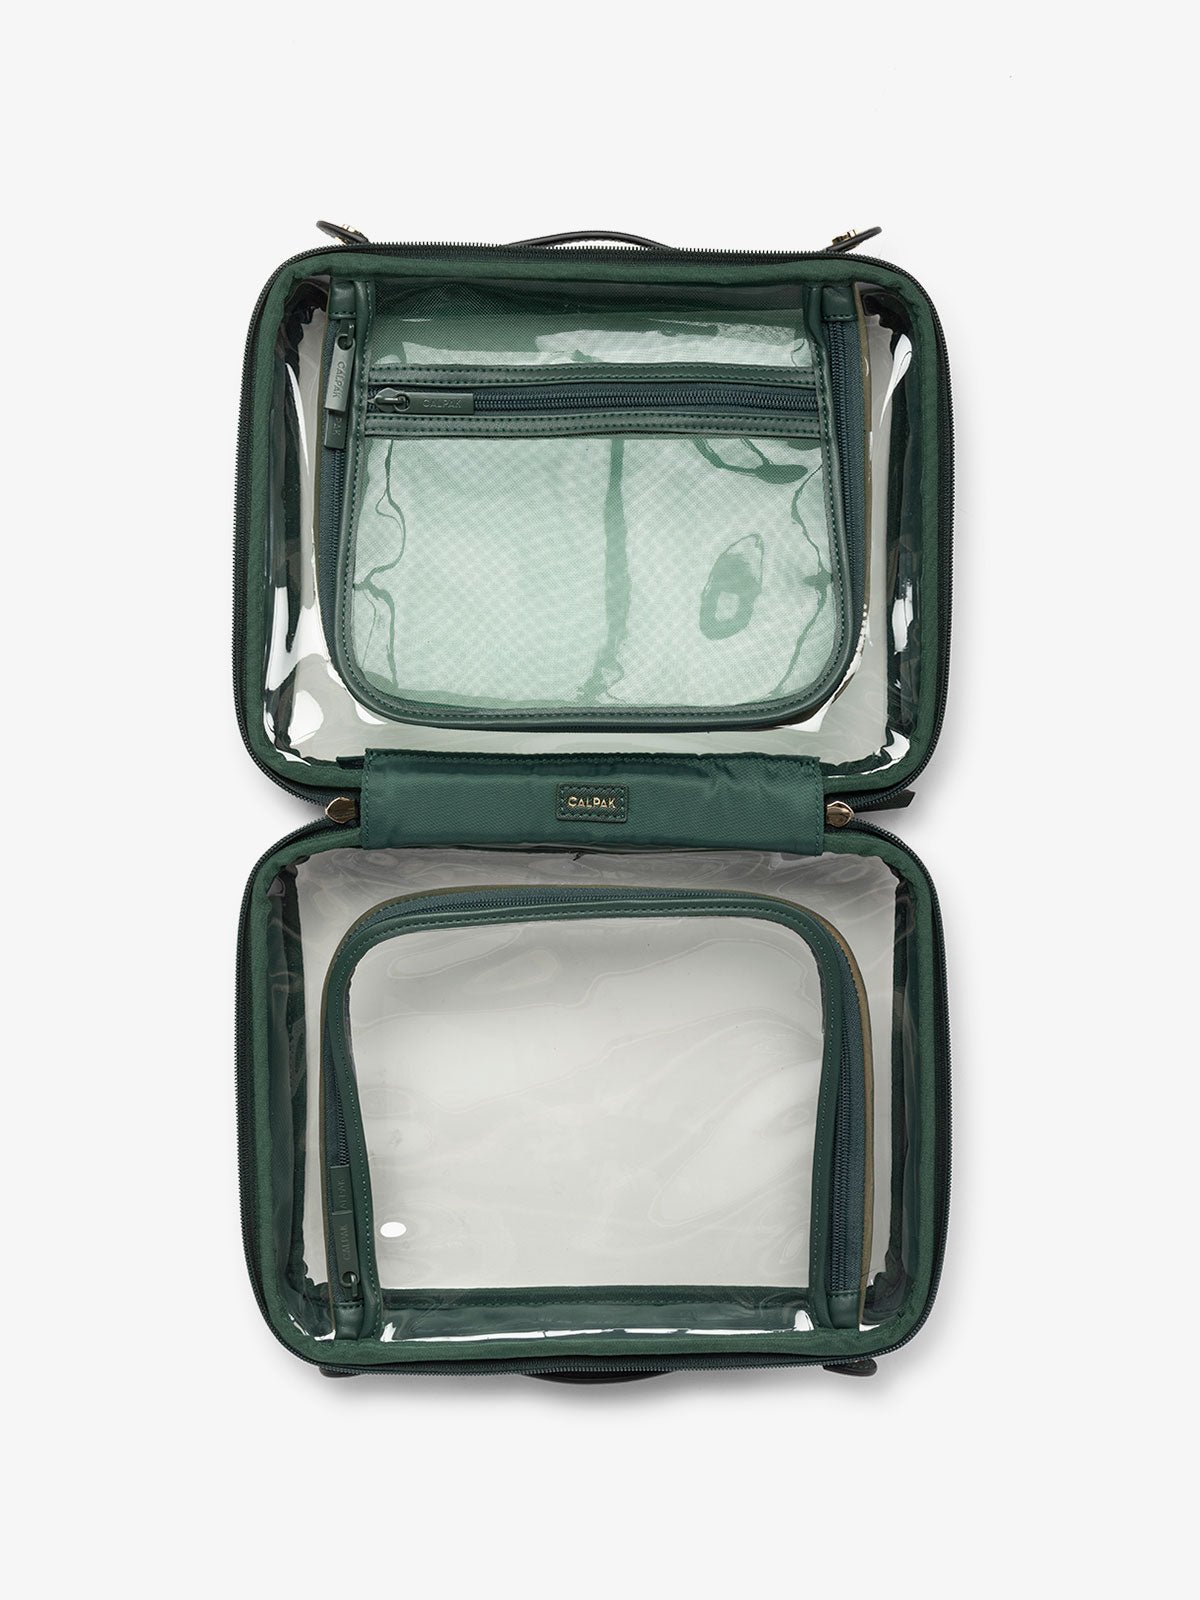 CALPAK large clear skincare bag with multiple zippered compartments in green